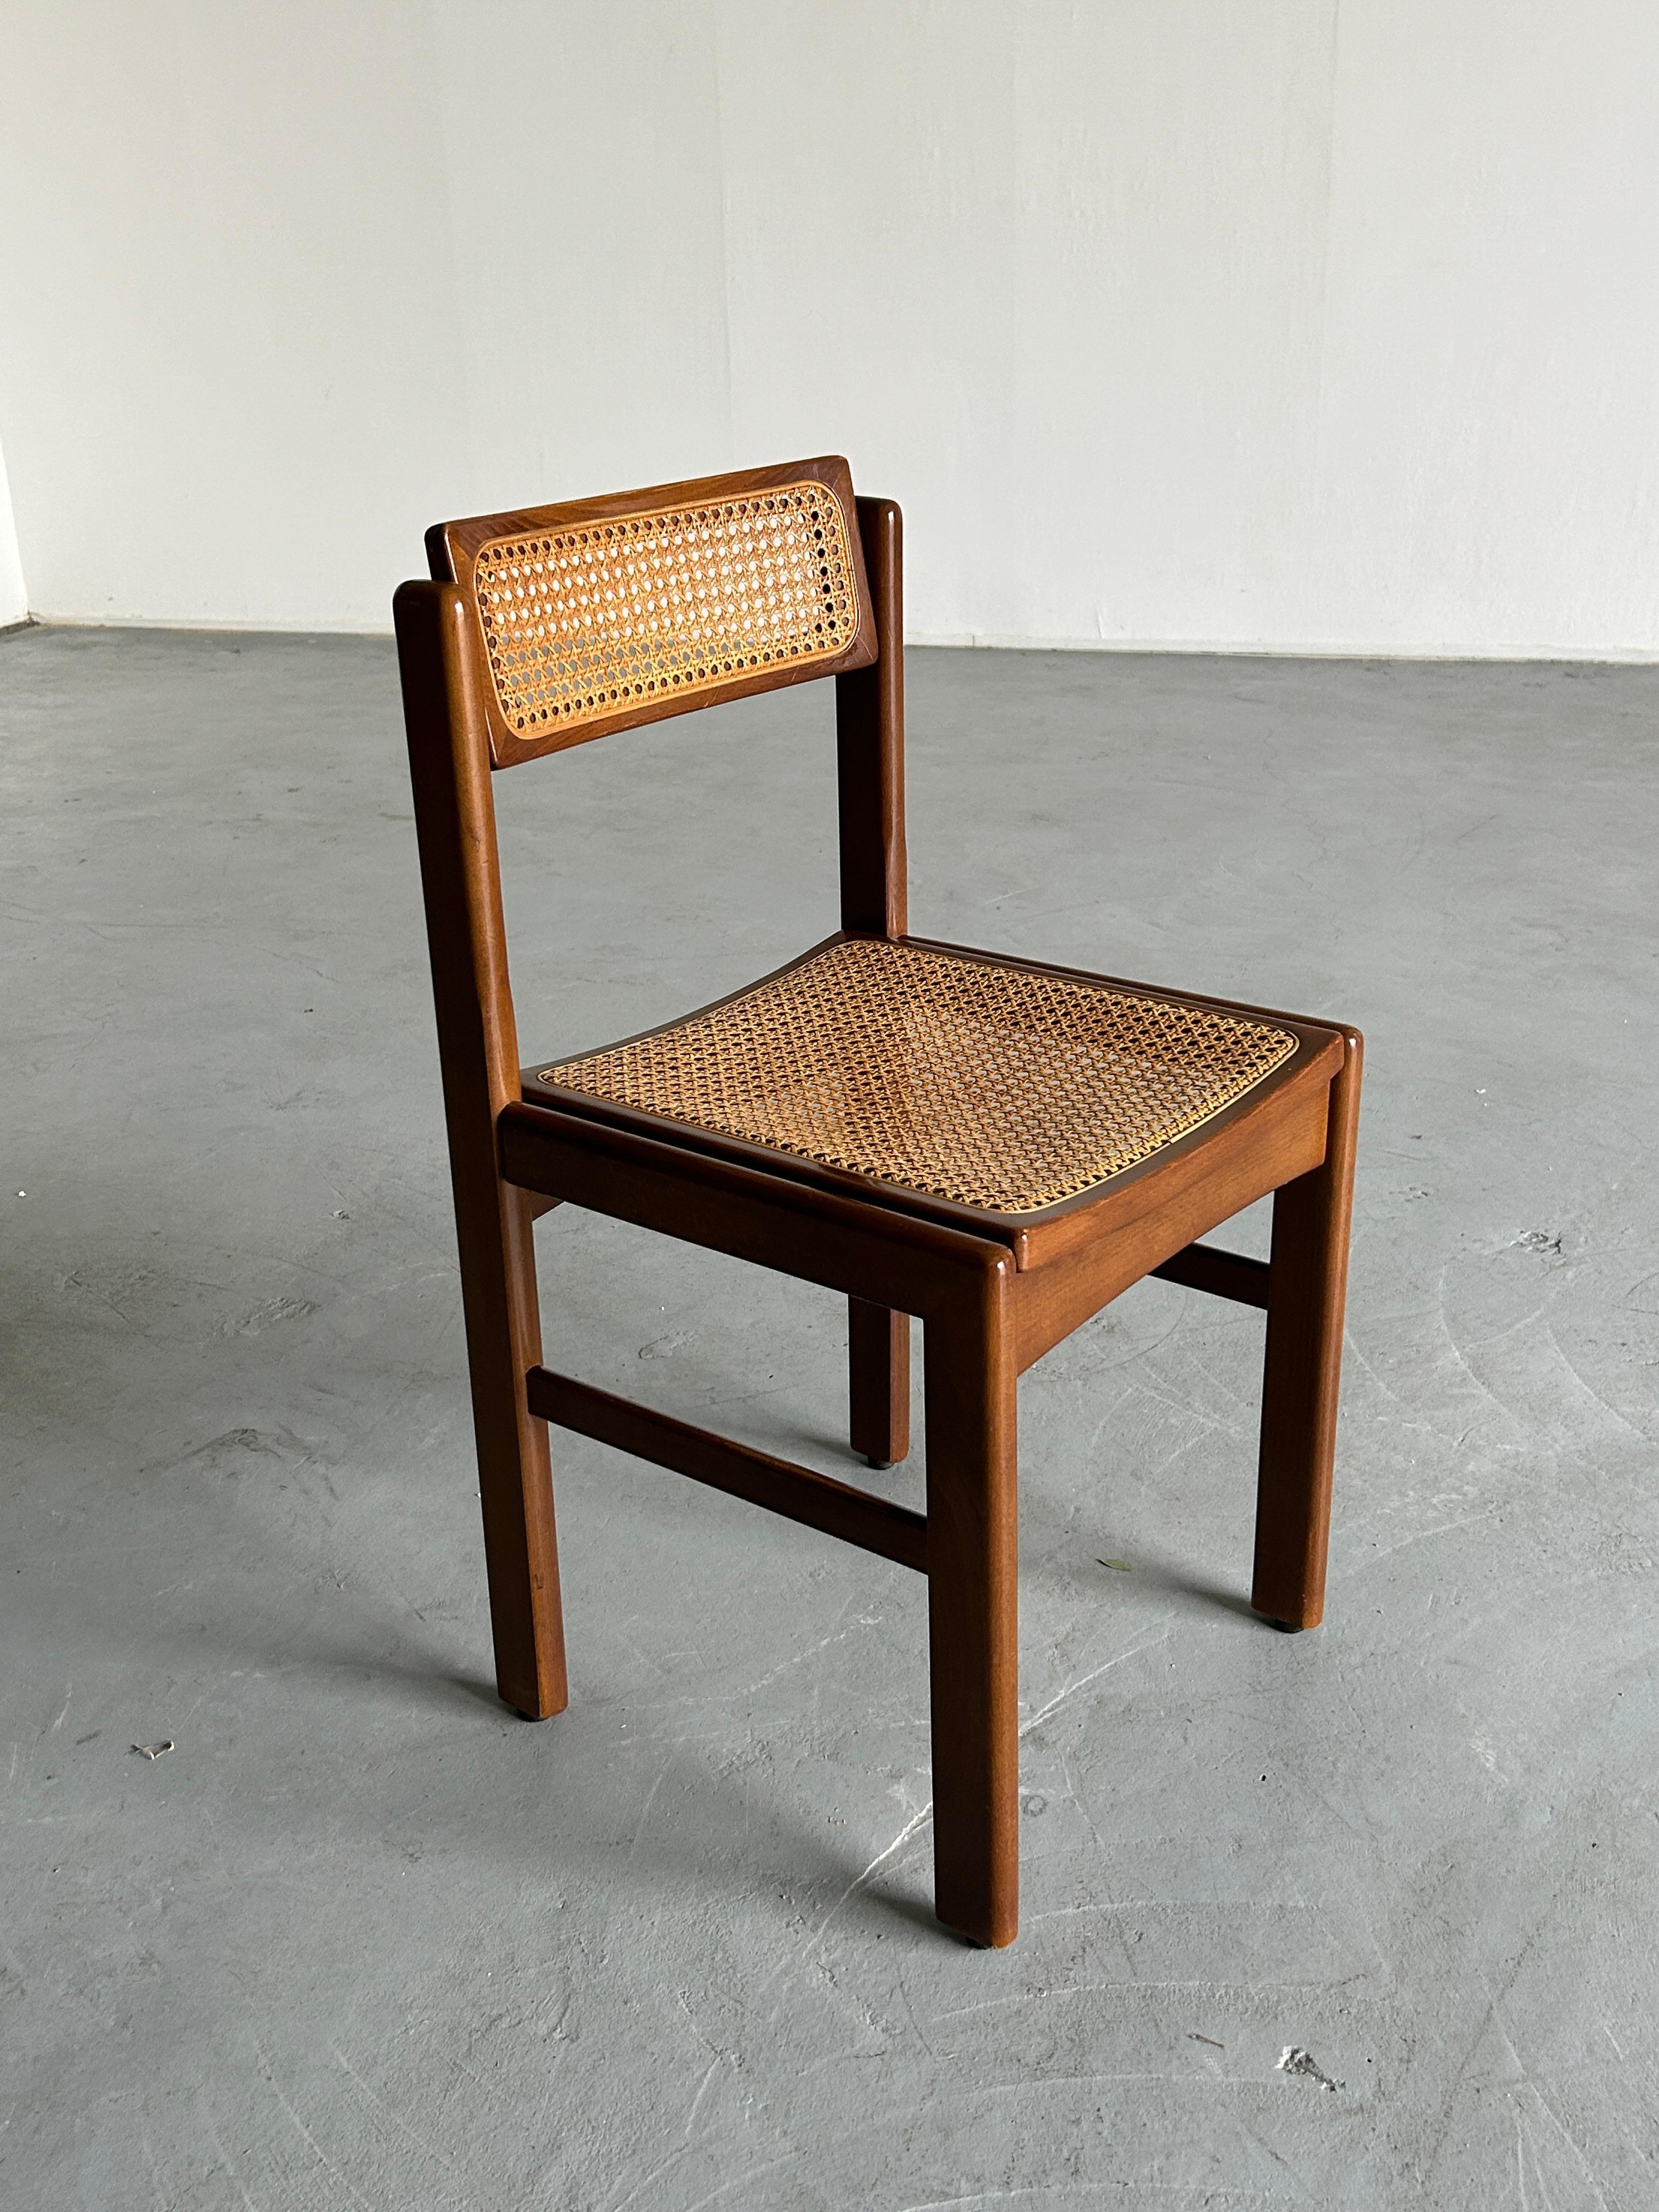 Italian Vintage Mid-Century Stained Beechwood and Wicker Cane Dining Chair, 1960s Italy